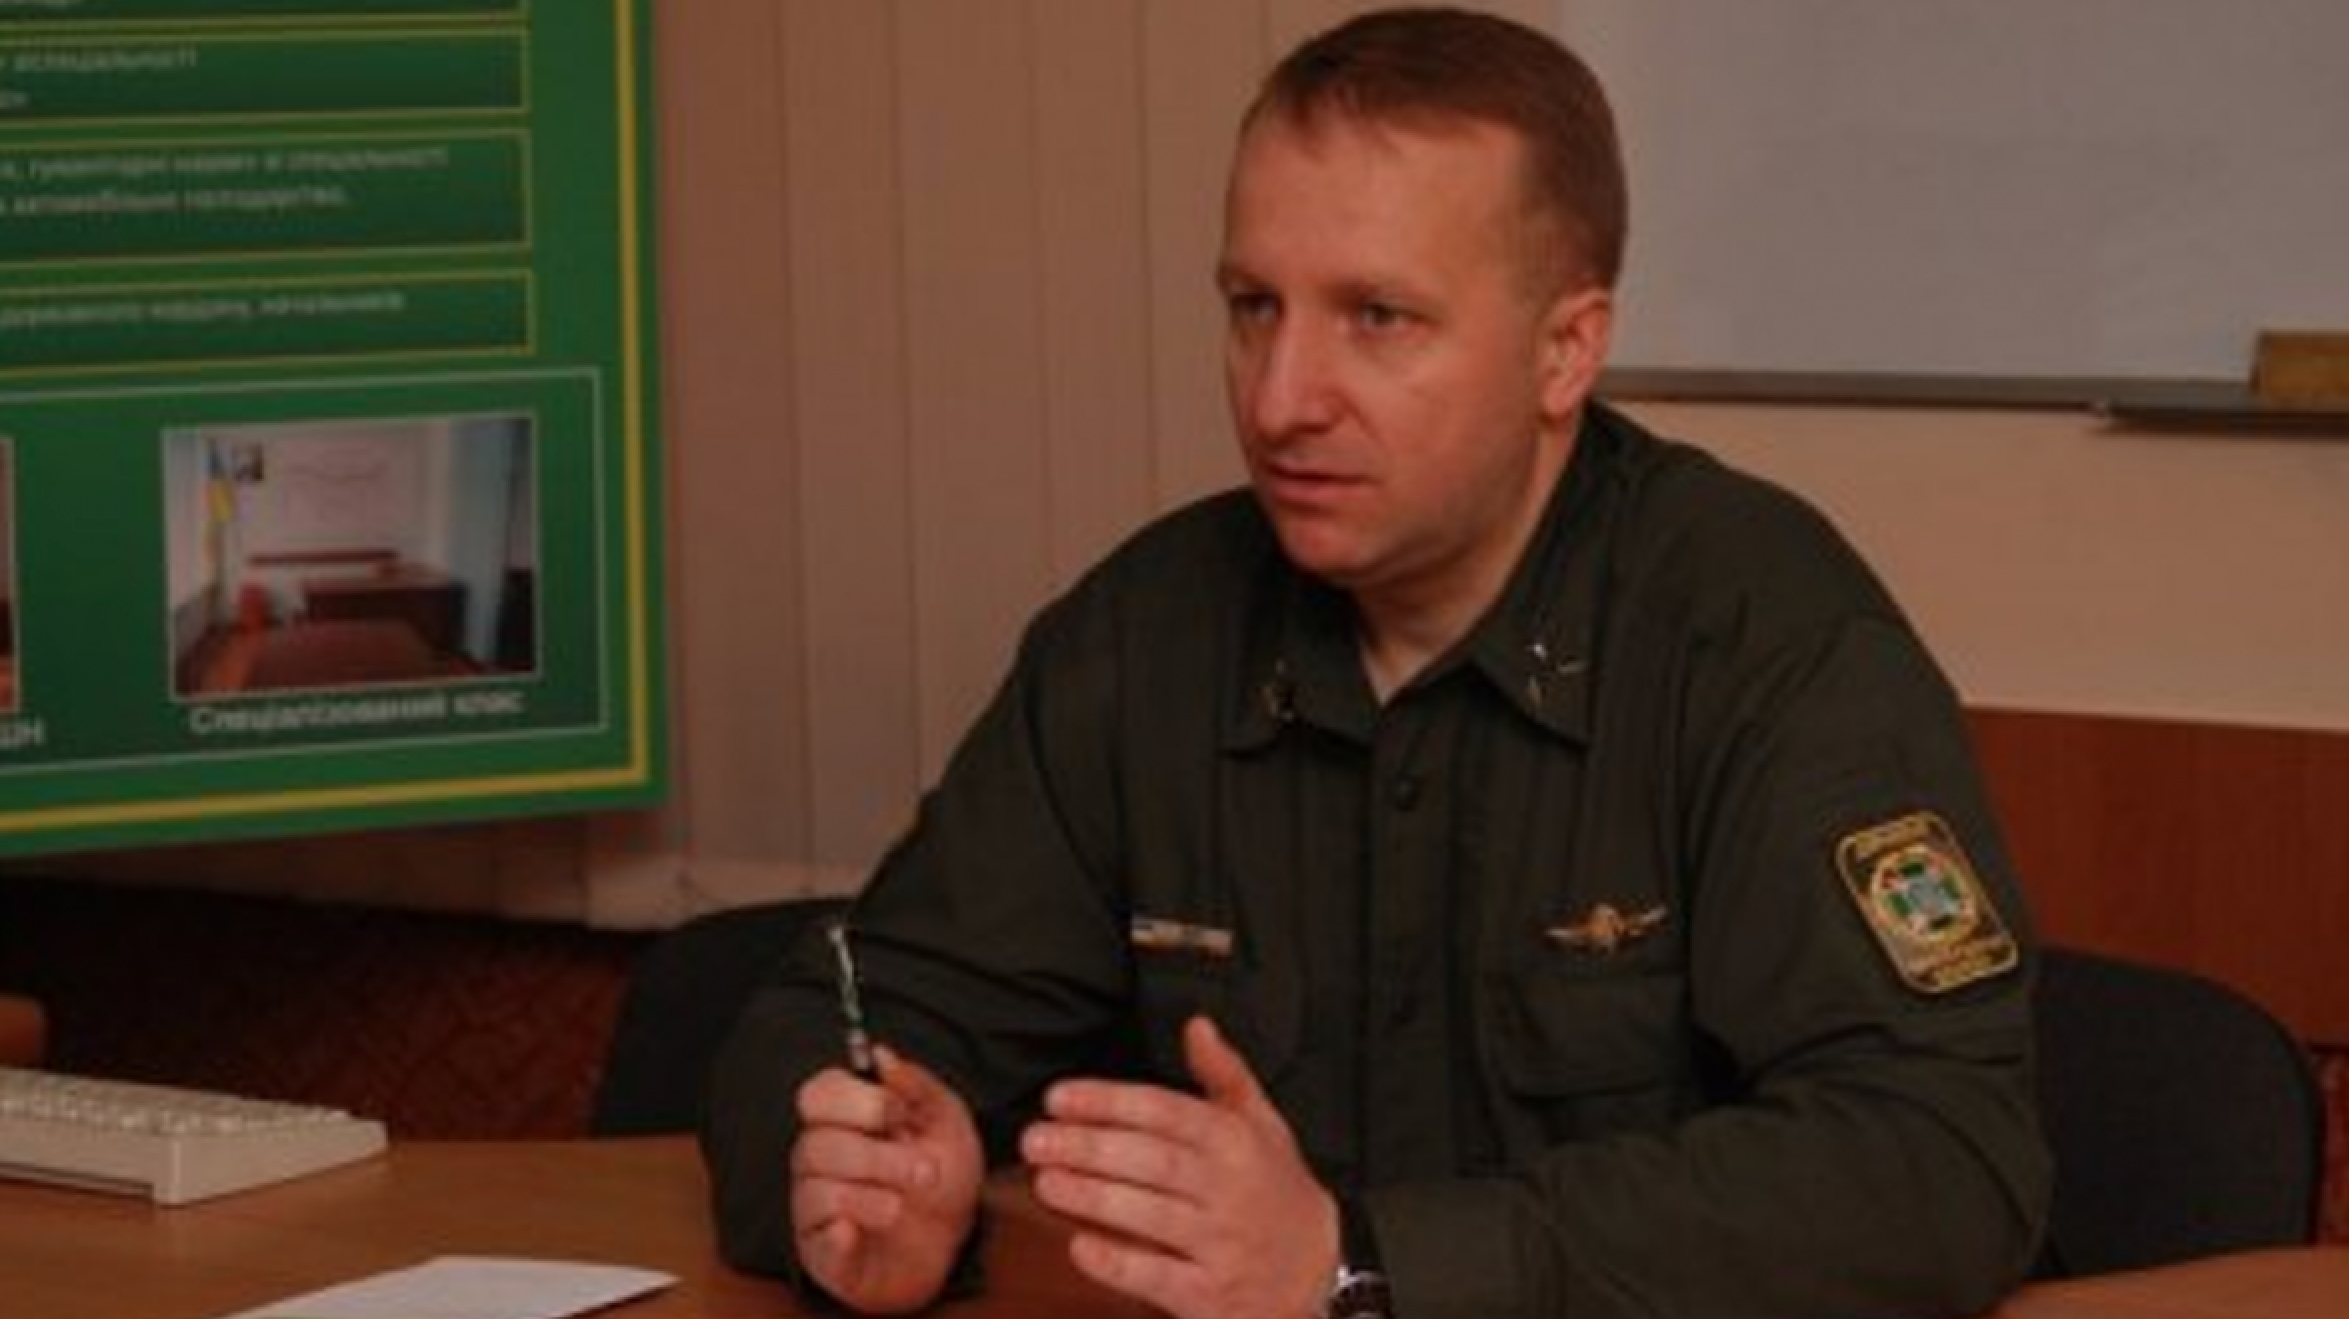 Top border guard acquitted on charges of lying in his asset declaration